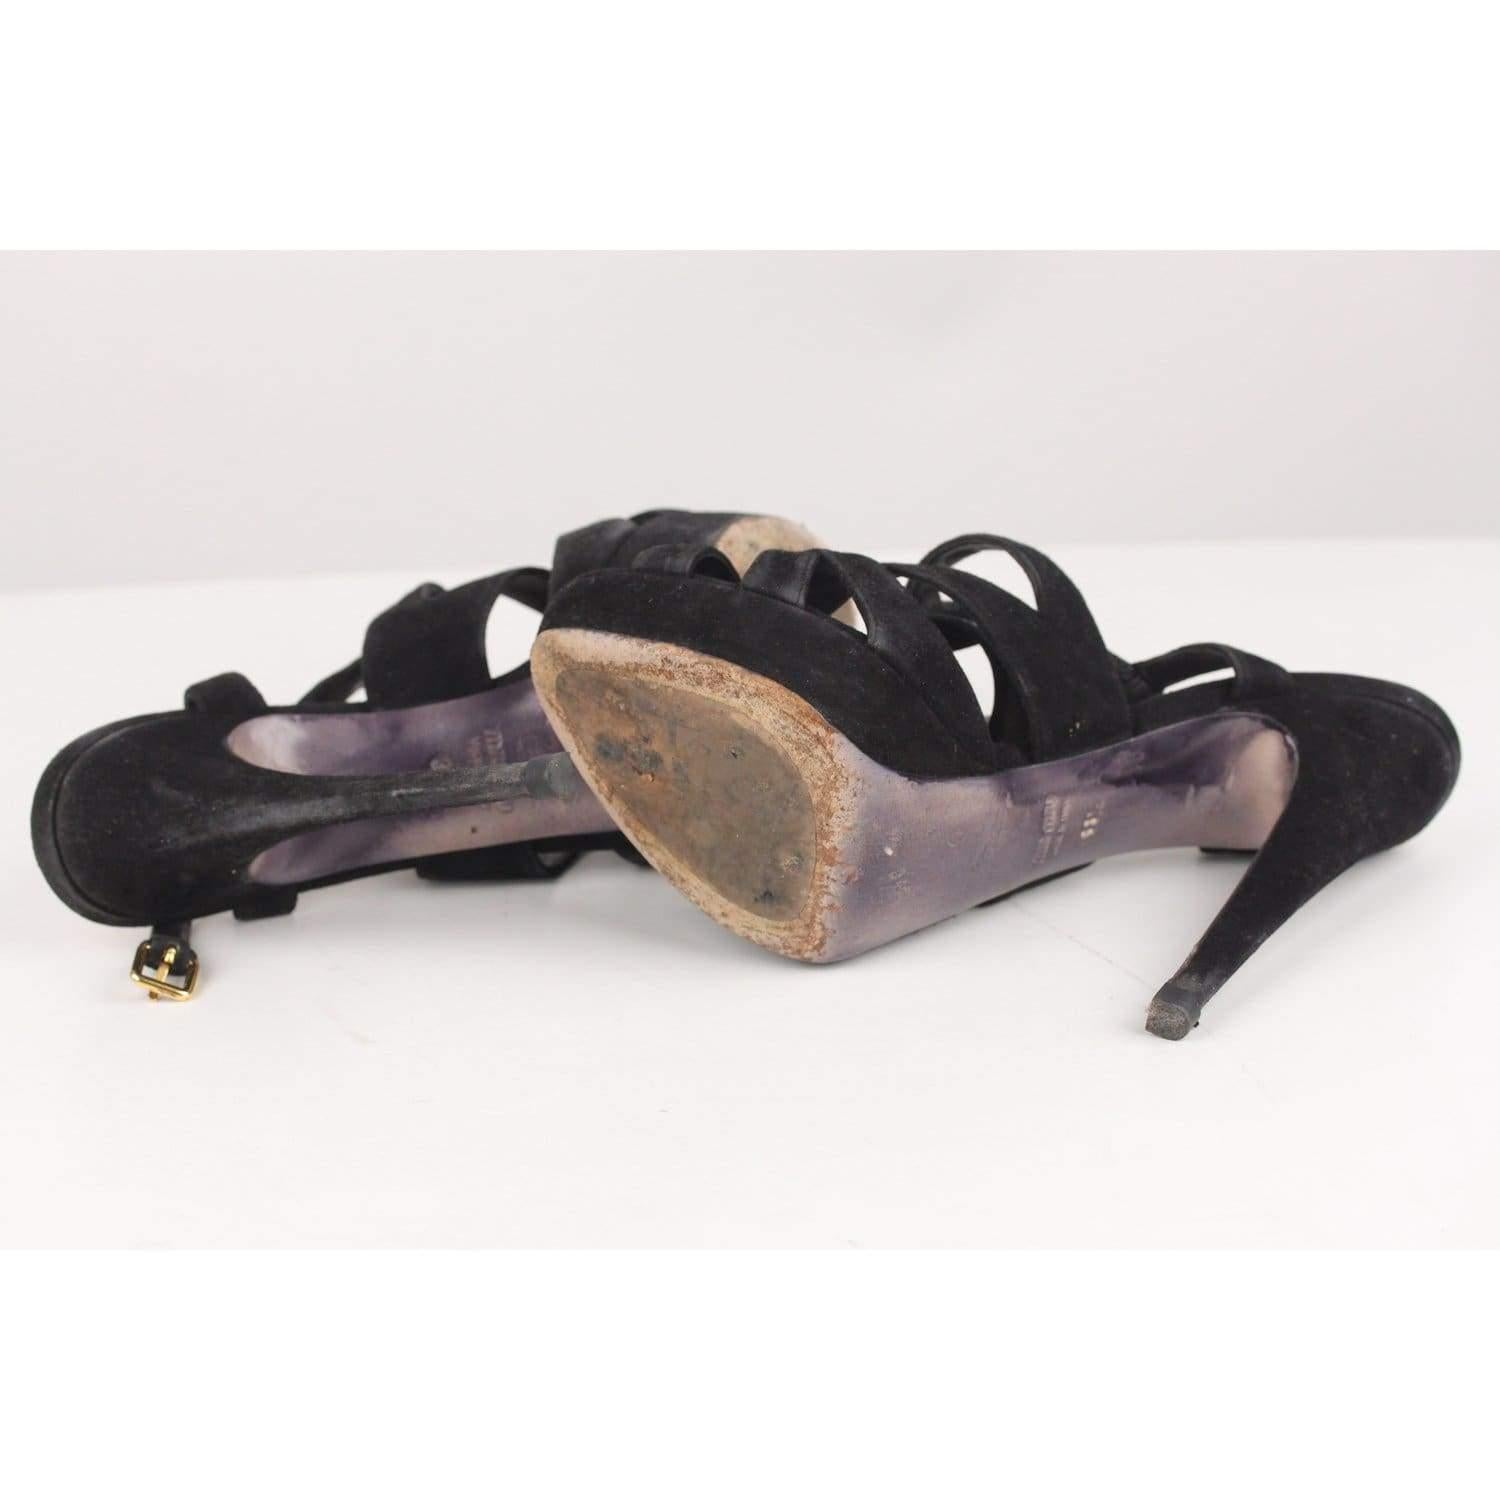 MATERIAL: Suede COLOR: Black MODEL: Sandals GENDER: Women SIZE: 38.5 COUNTRY OF MANUFACTURE: Italy Condition CONDITION DETAILS: C: FAIR CONDITION - Well used, with noticeable defects - some wear of use on the outsoles, some wear of use on the